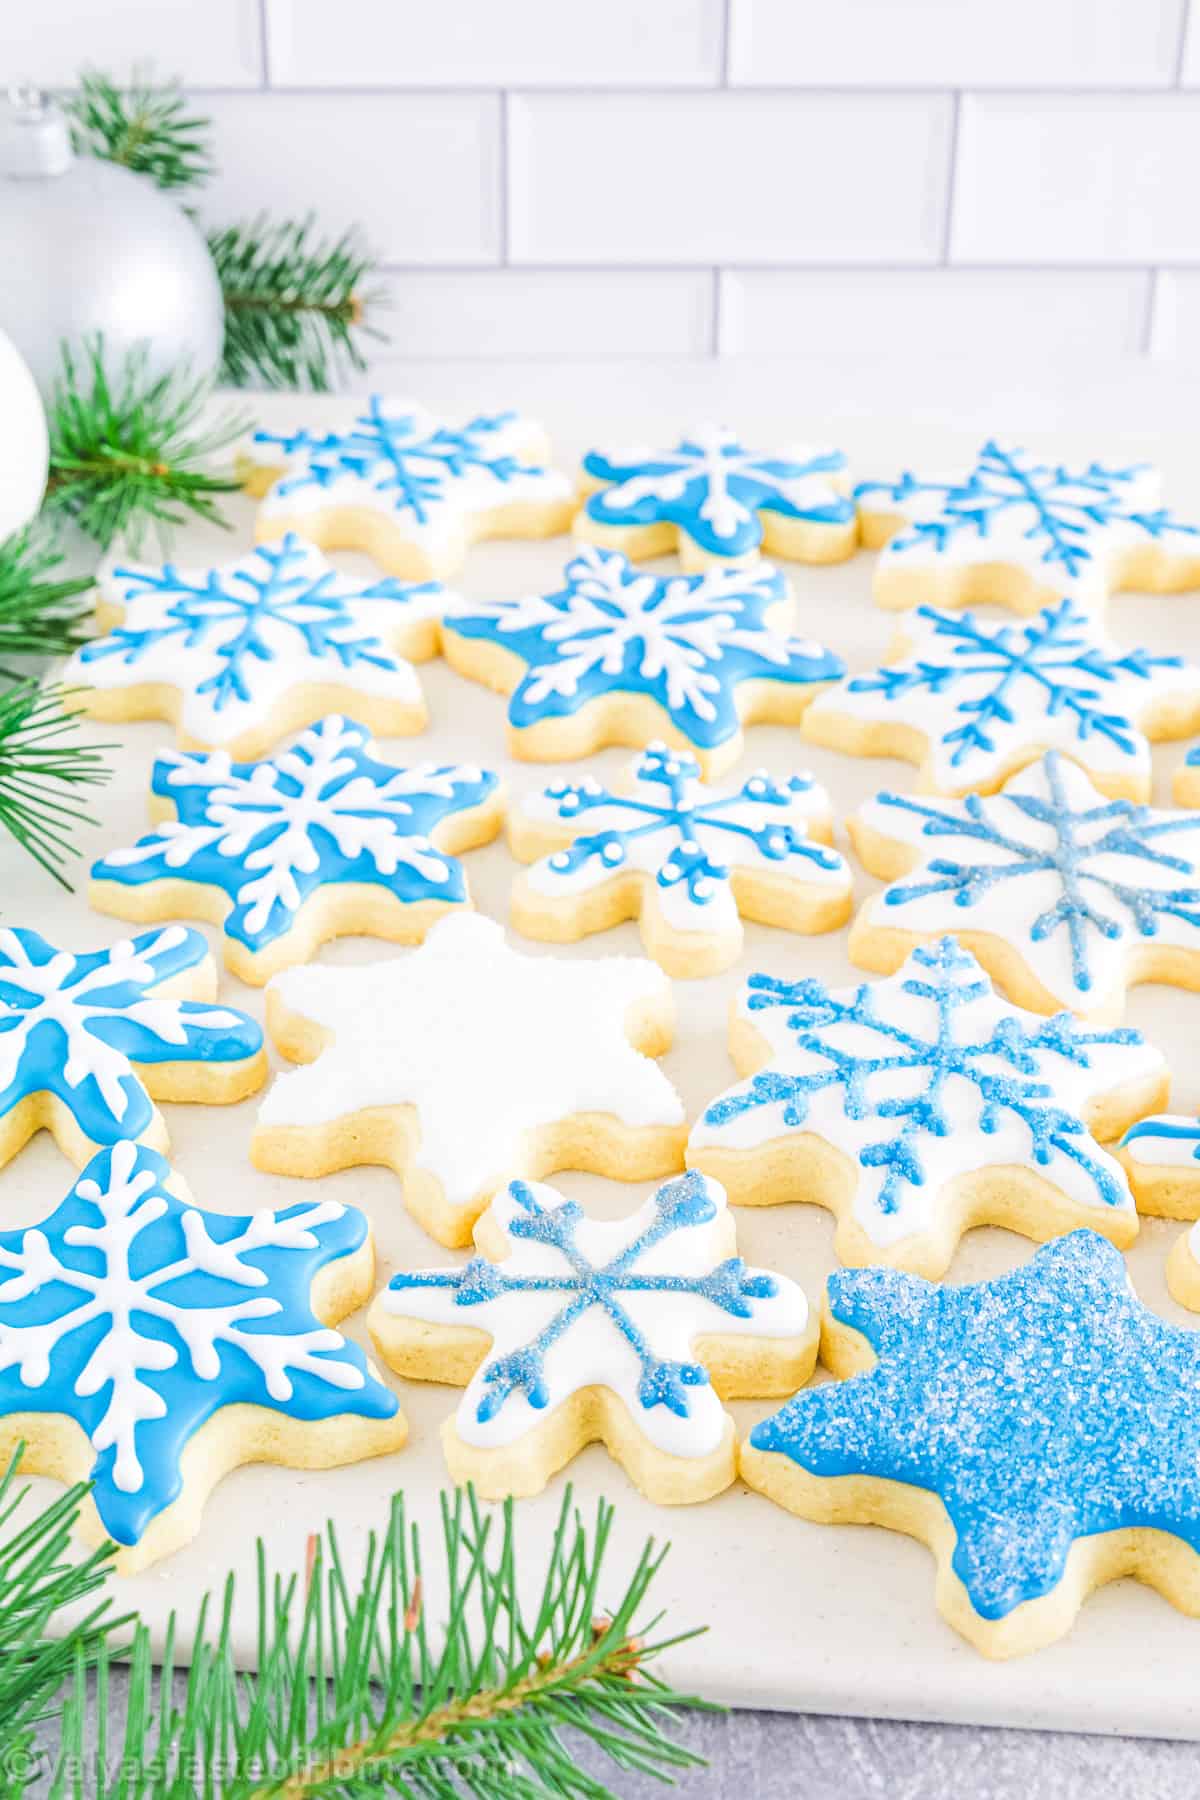 This recipe involves making delicious sugar cookies cut into snowflake shapes using a snowflake cookie cutter, then decorating them with royal icing to mimic the intricate beauty of snowflakes.